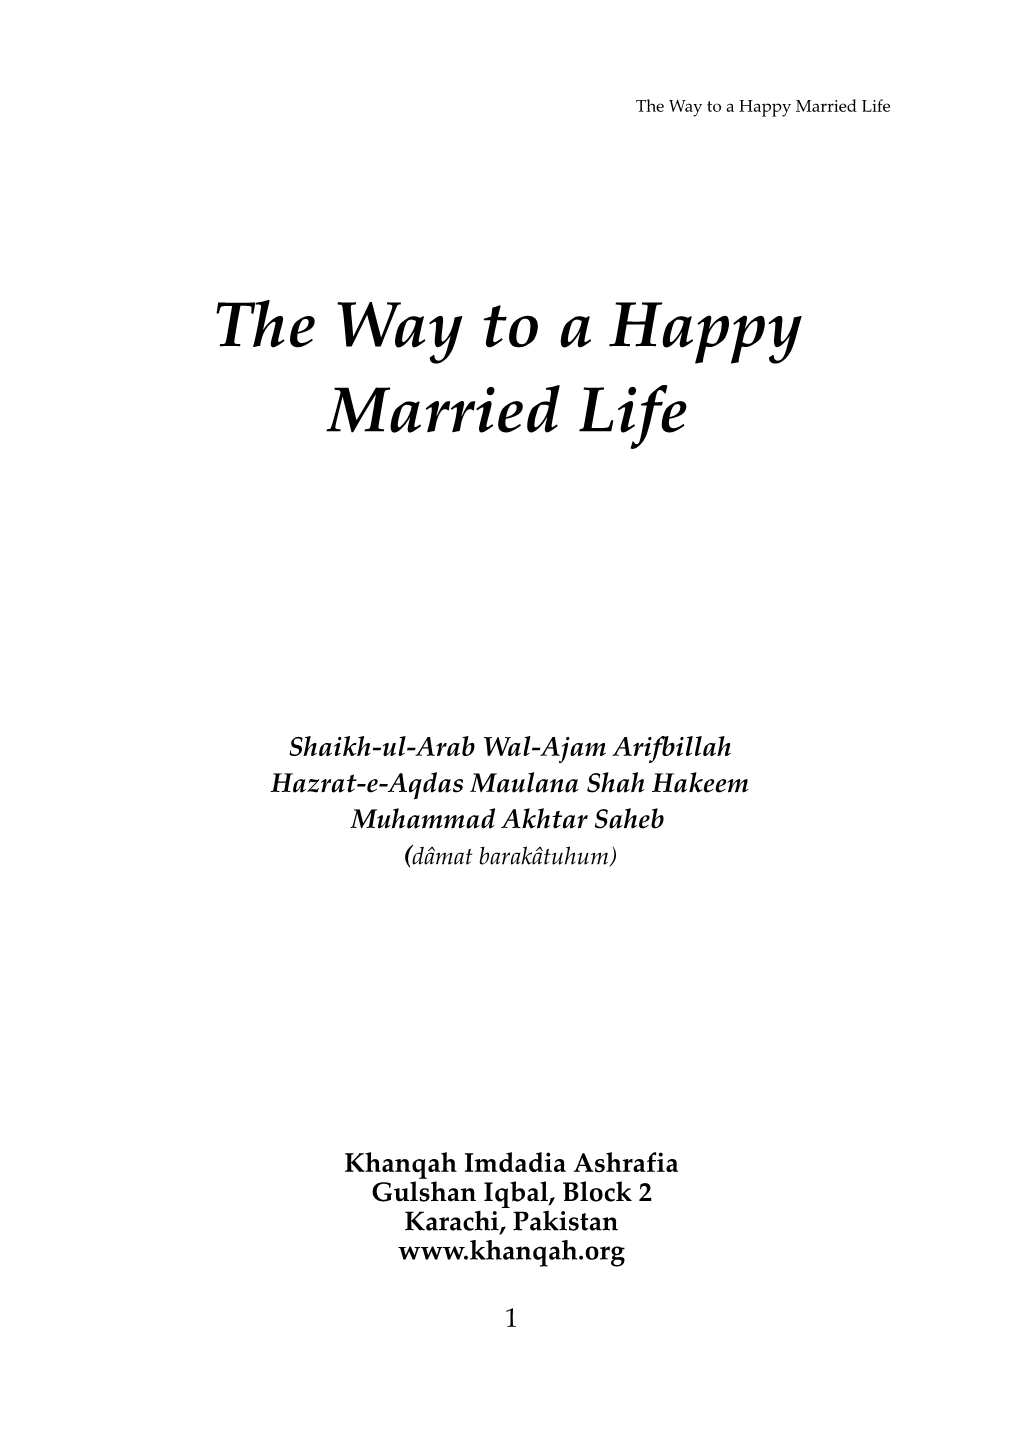 The Way to a Happy Married Life